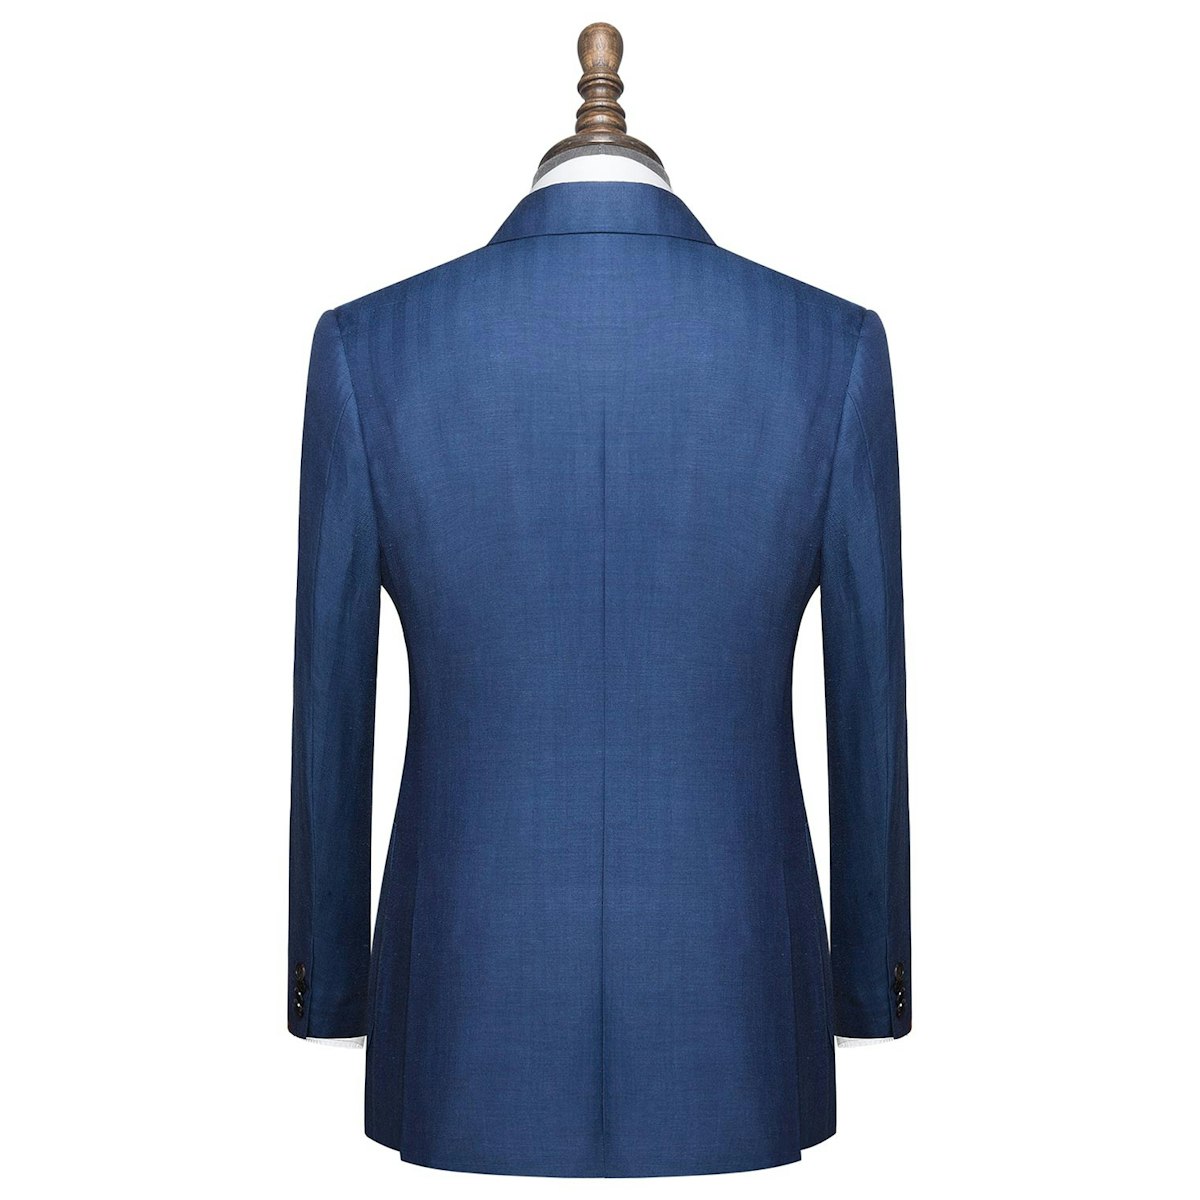 InStitchu Collection The Southampton mens suit